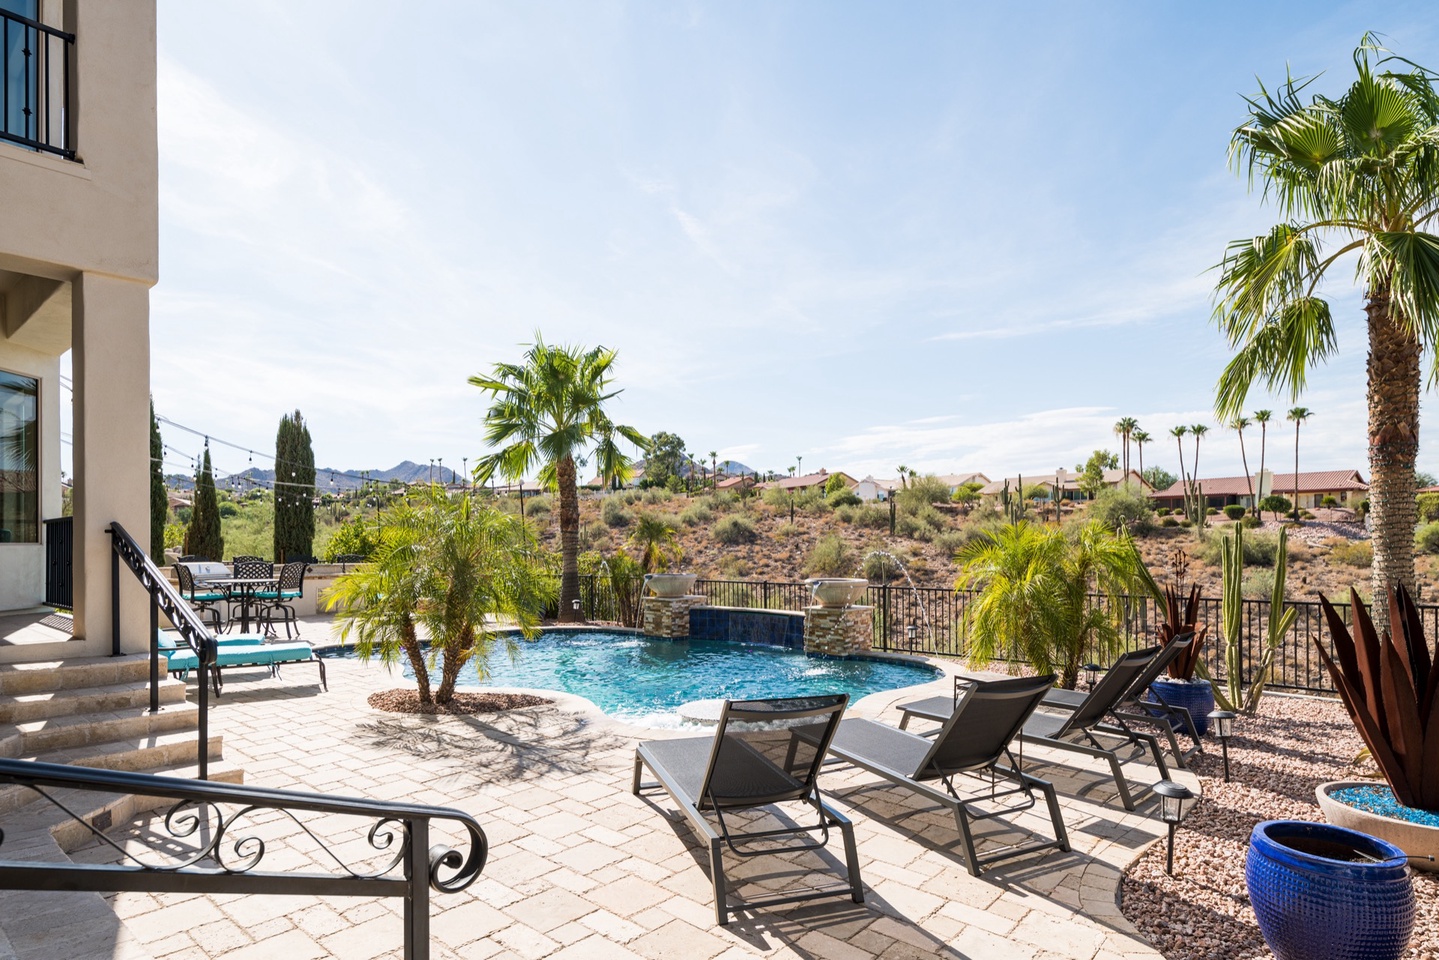 Lounge in the valley of Fountain Hills